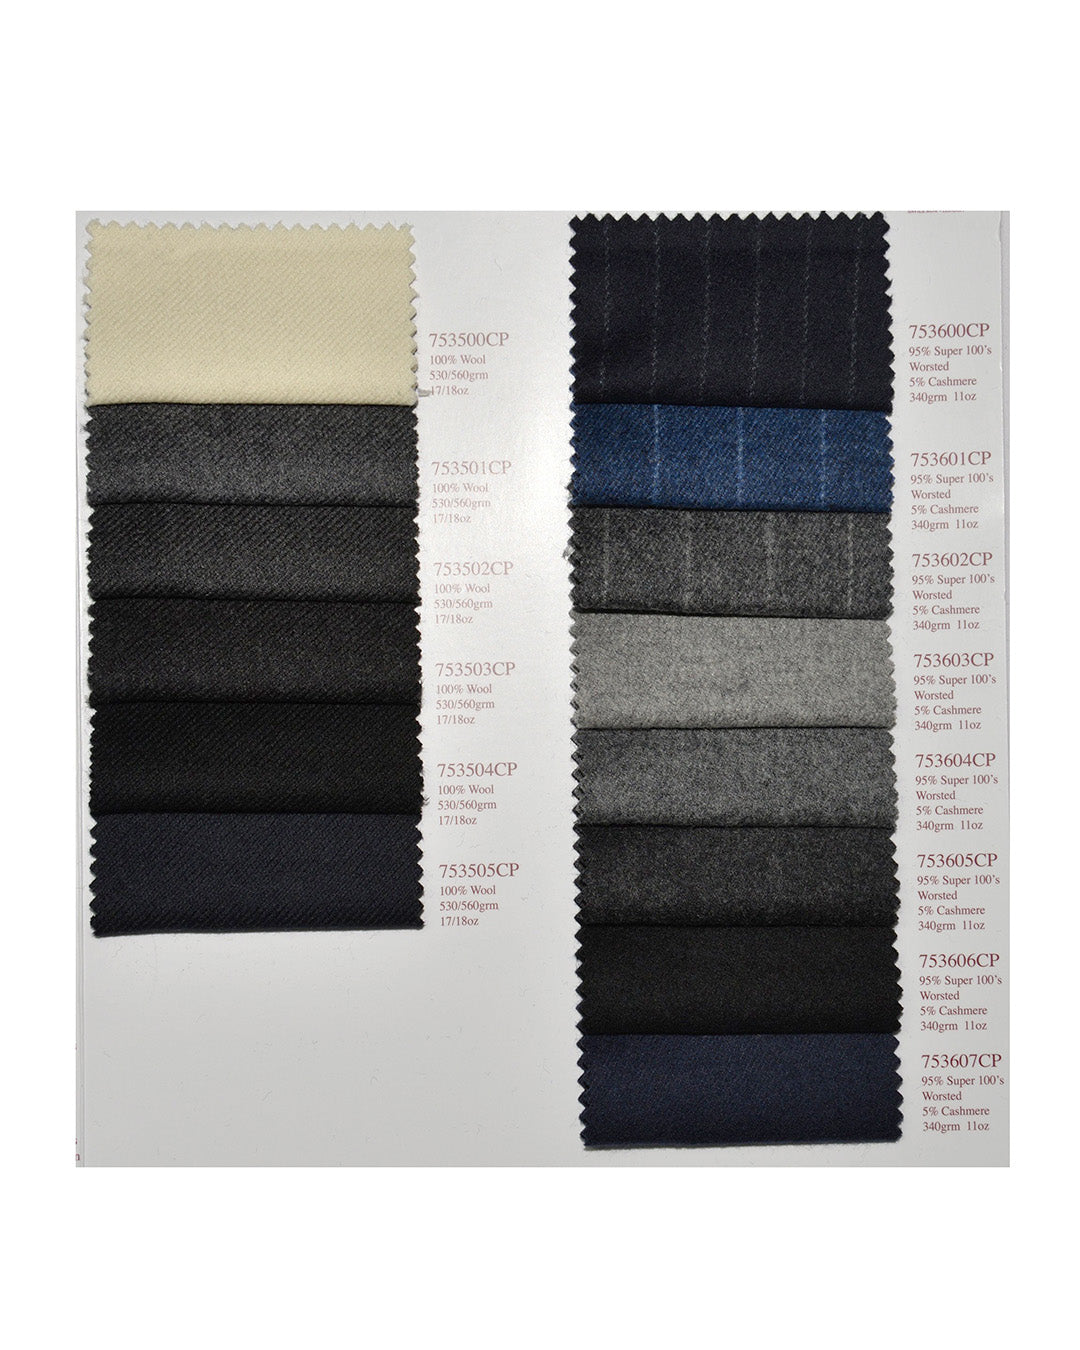 Holland Sherry Classic Worsted Flannel Dark Grey With Light Grey Flannel